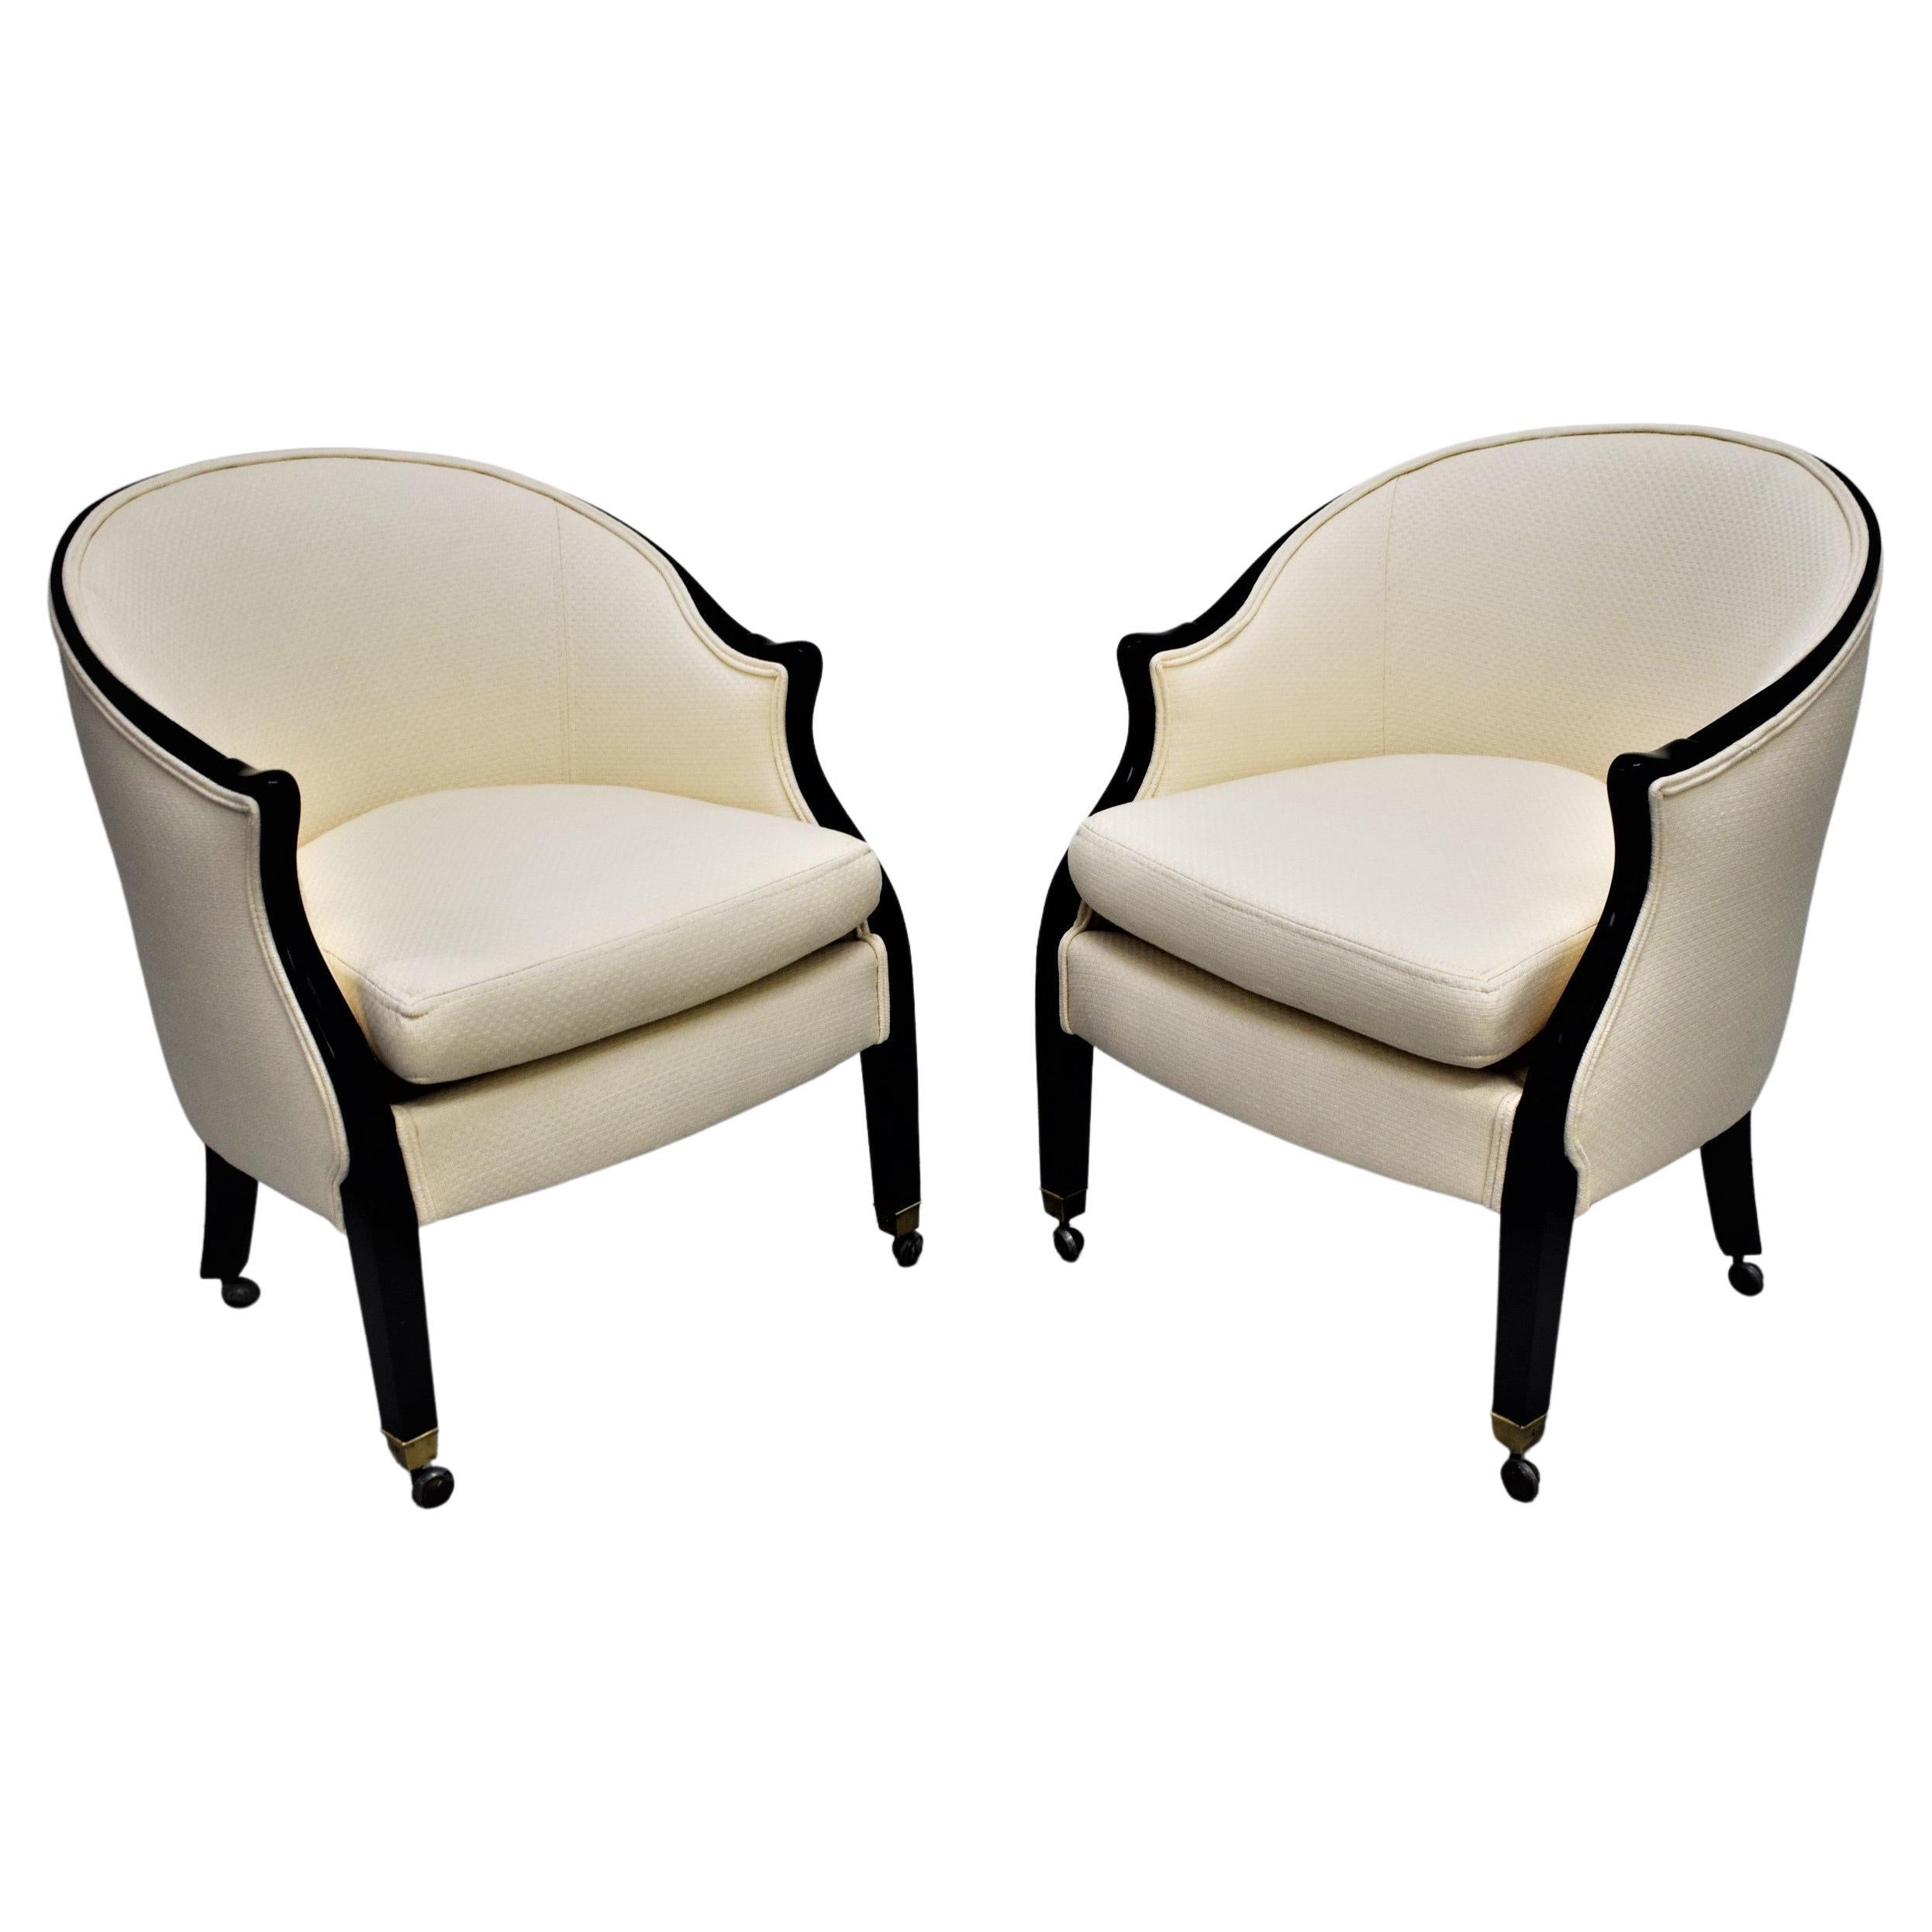 American Pair of Lounge Chairs by Baker